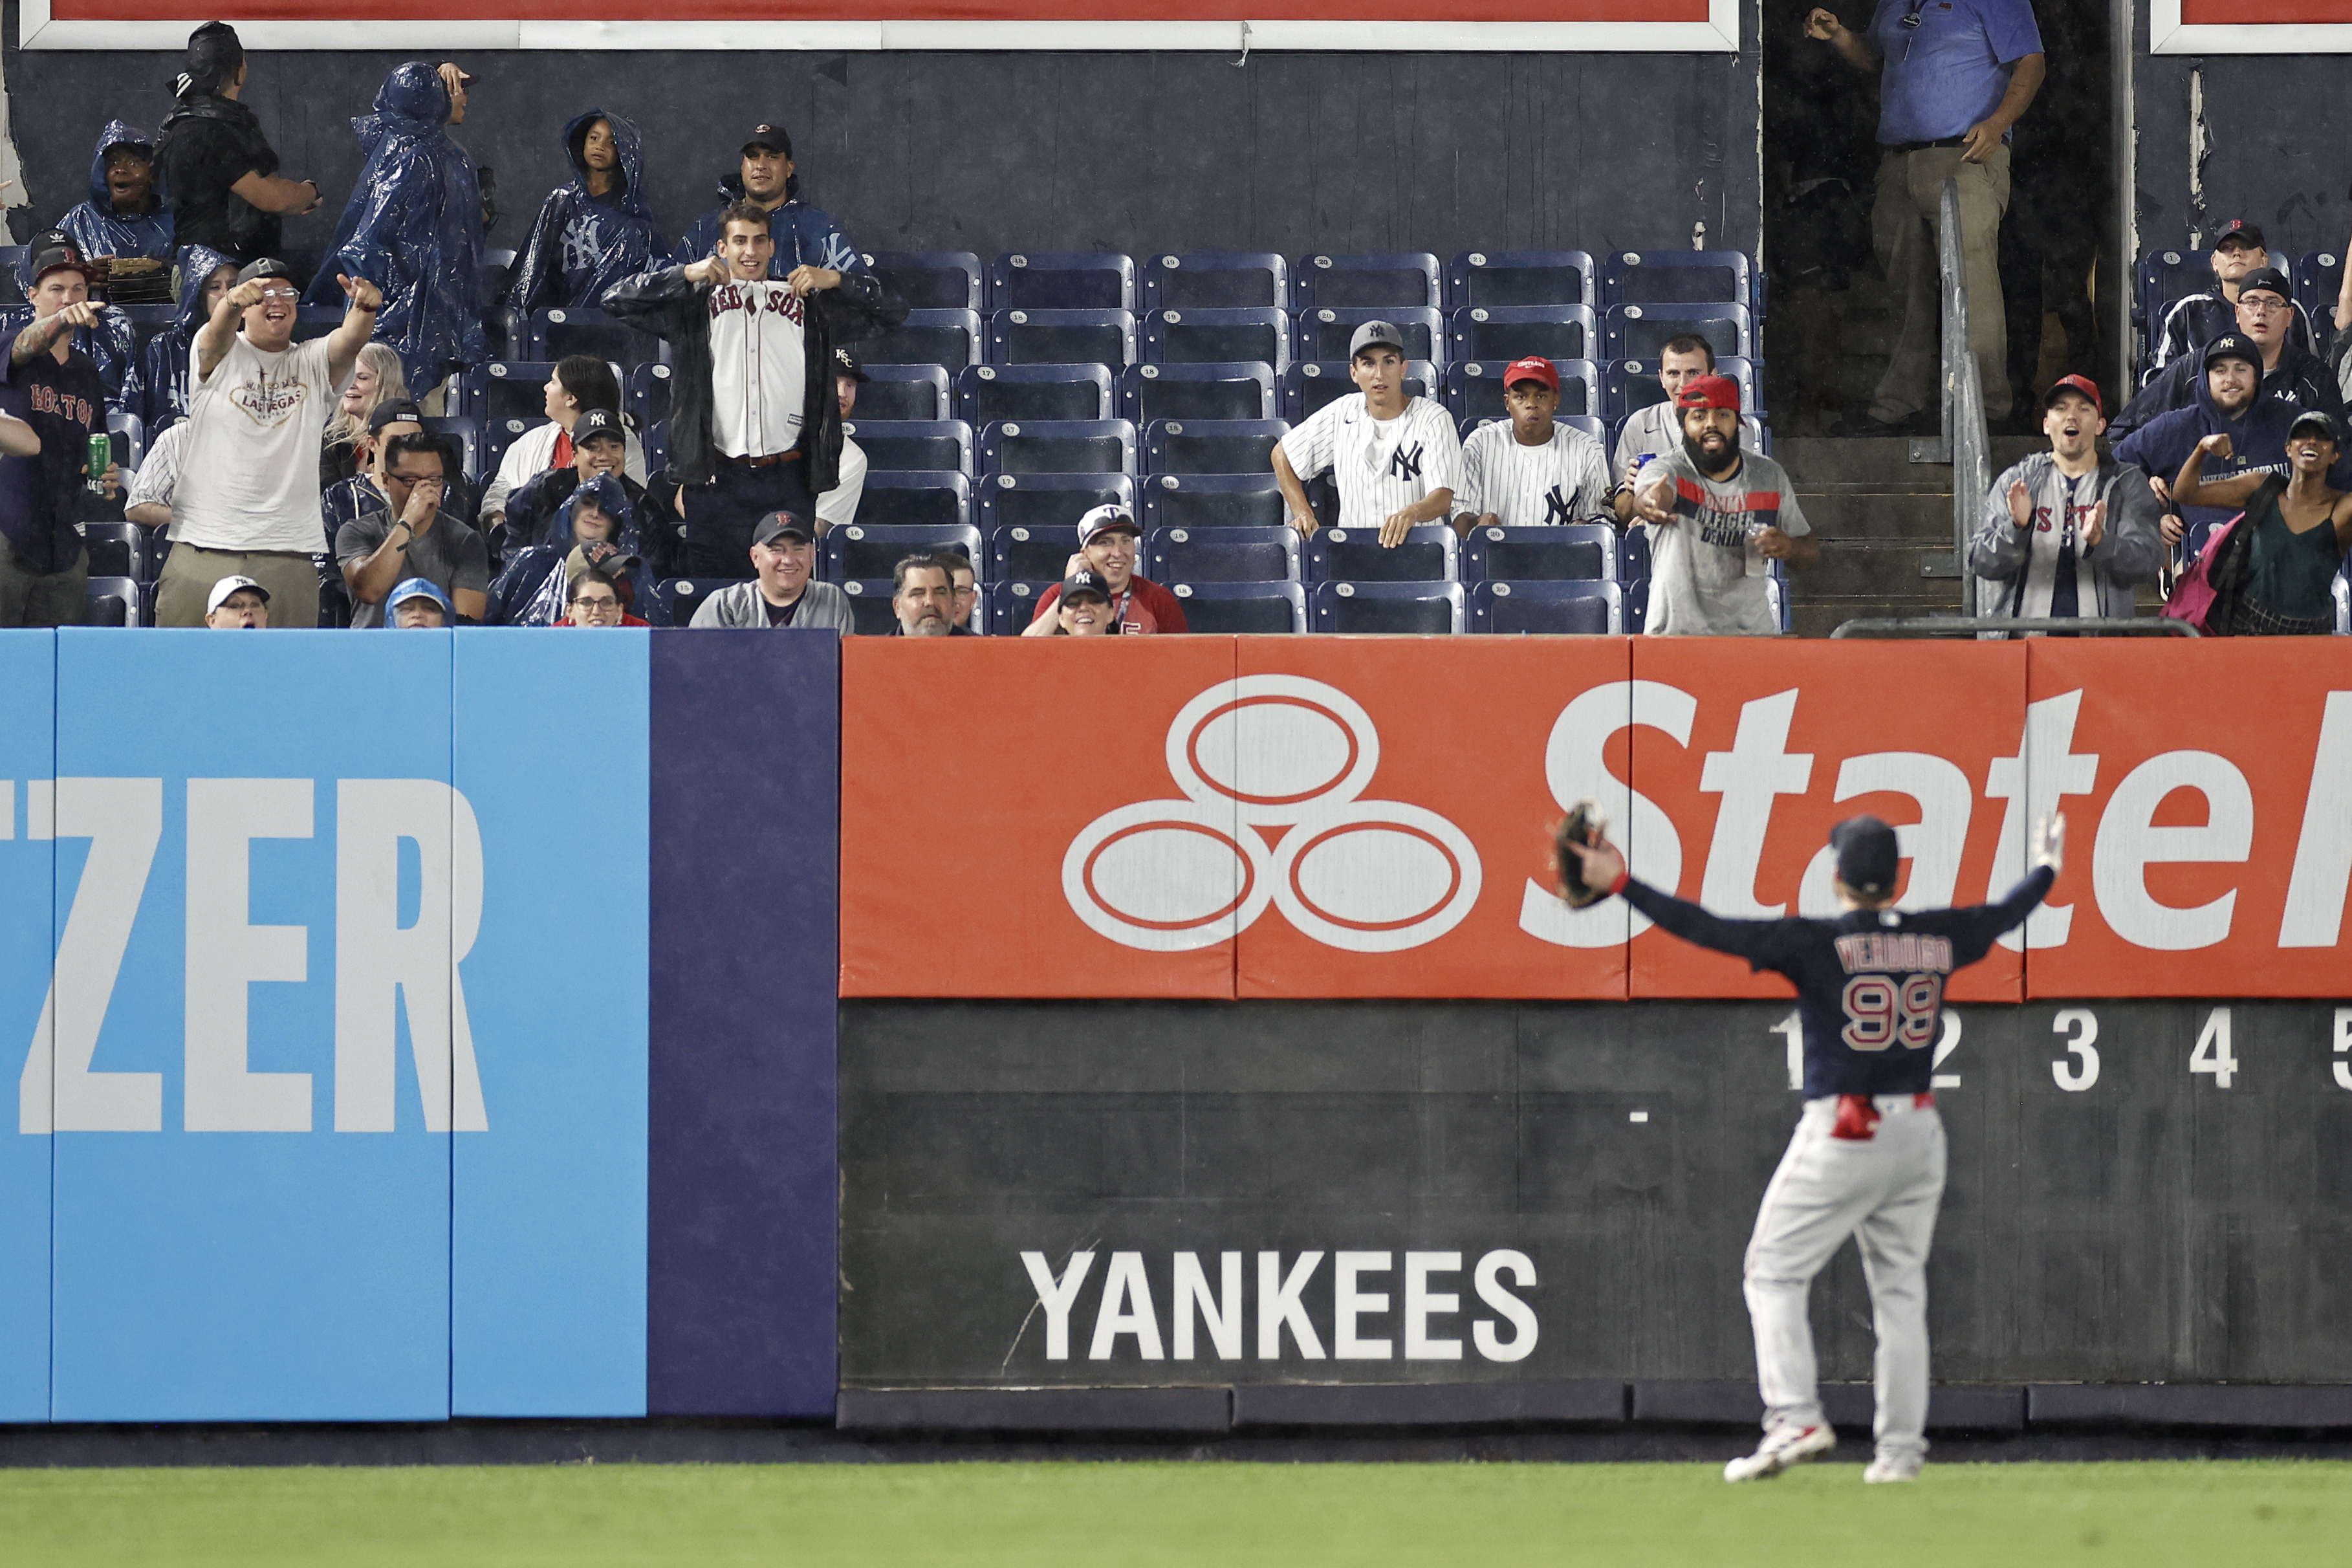 Watch these Yankee fans try to say something nice about the Red Sox